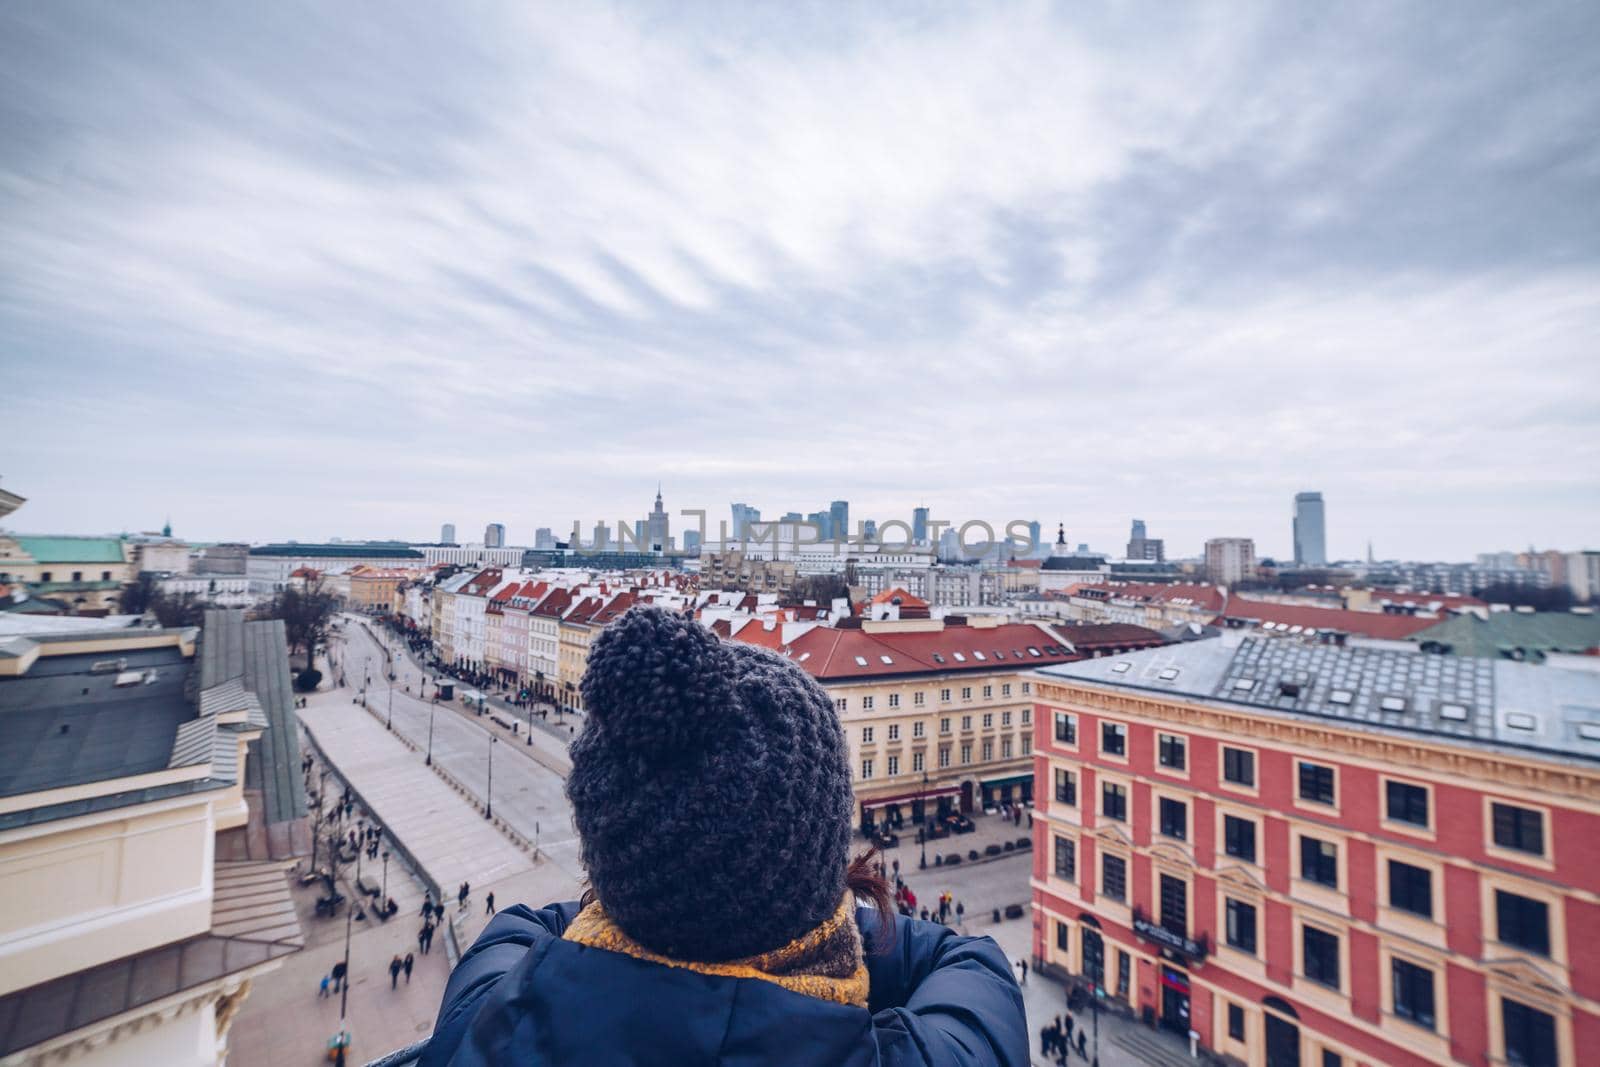 Tourist looking the Warsaw City Center from the tower during winter season.